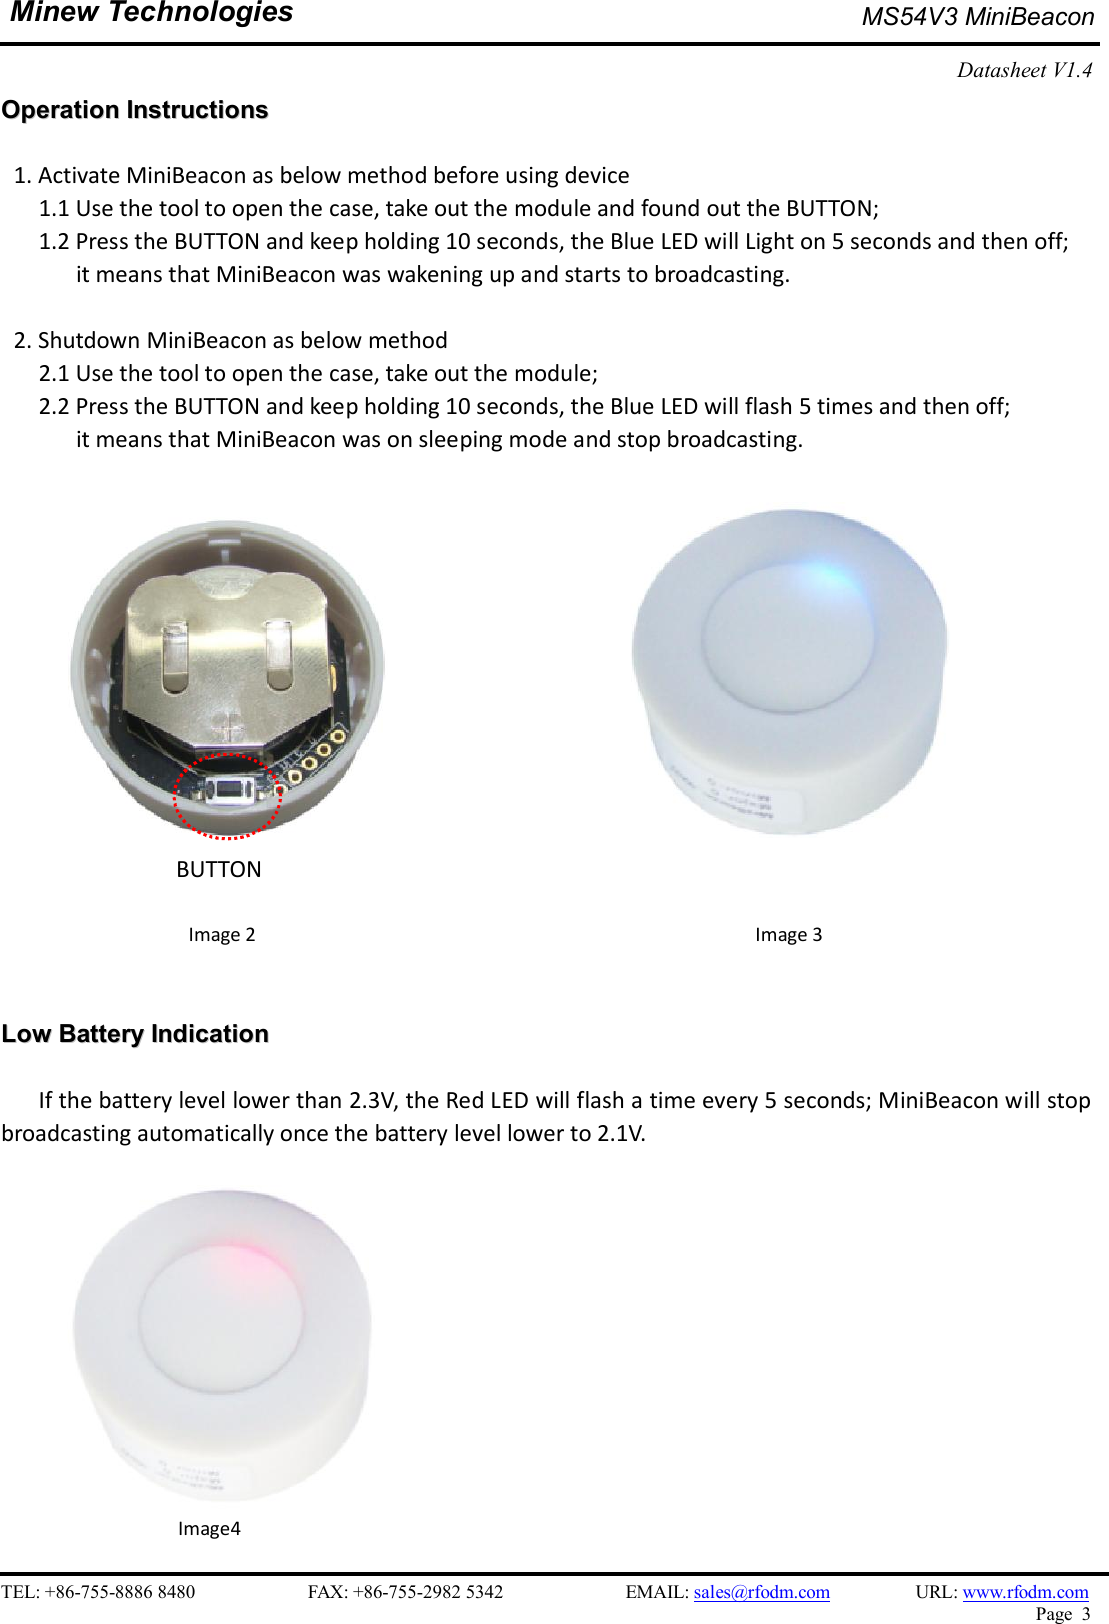    TEL: +86-755-8886 8480                        FAX: +86-755-2982 5342                          EMAIL: sales@rfodm.com         URL: www.rfodm.com   Page  3  Minew Technologies MS54V3 MiniBeacon   Datasheet V1.4    OOppeerraattiioonn  IInnssttrruuccttiioonnss   1. Activate MiniBeacon as below method before using device       1.1 Use the tool to open the case, take out the module and found out the BUTTON;   1.2 Press the BUTTON and keep holding 10 seconds, the Blue LED will Light on 5 seconds and then off;   it means that MiniBeacon was wakening up and starts to broadcasting.  2. Shutdown MiniBeacon as below method       2.1 Use the tool to open the case, take out the module; 2.2 Press the BUTTON and keep holding 10 seconds, the Blue LED will flash 5 times and then off;   it means that MiniBeacon was on sleeping mode and stop broadcasting.                                     BUTTON  Image 2                                                Image 3   LLooww  BBaatttteerryy  IInnddiiccaattiioonn      If the battery level lower than 2.3V, the Red LED will flash a time every 5 seconds; MiniBeacon will stop broadcasting automatically once the battery level lower to 2.1V.      Image4 